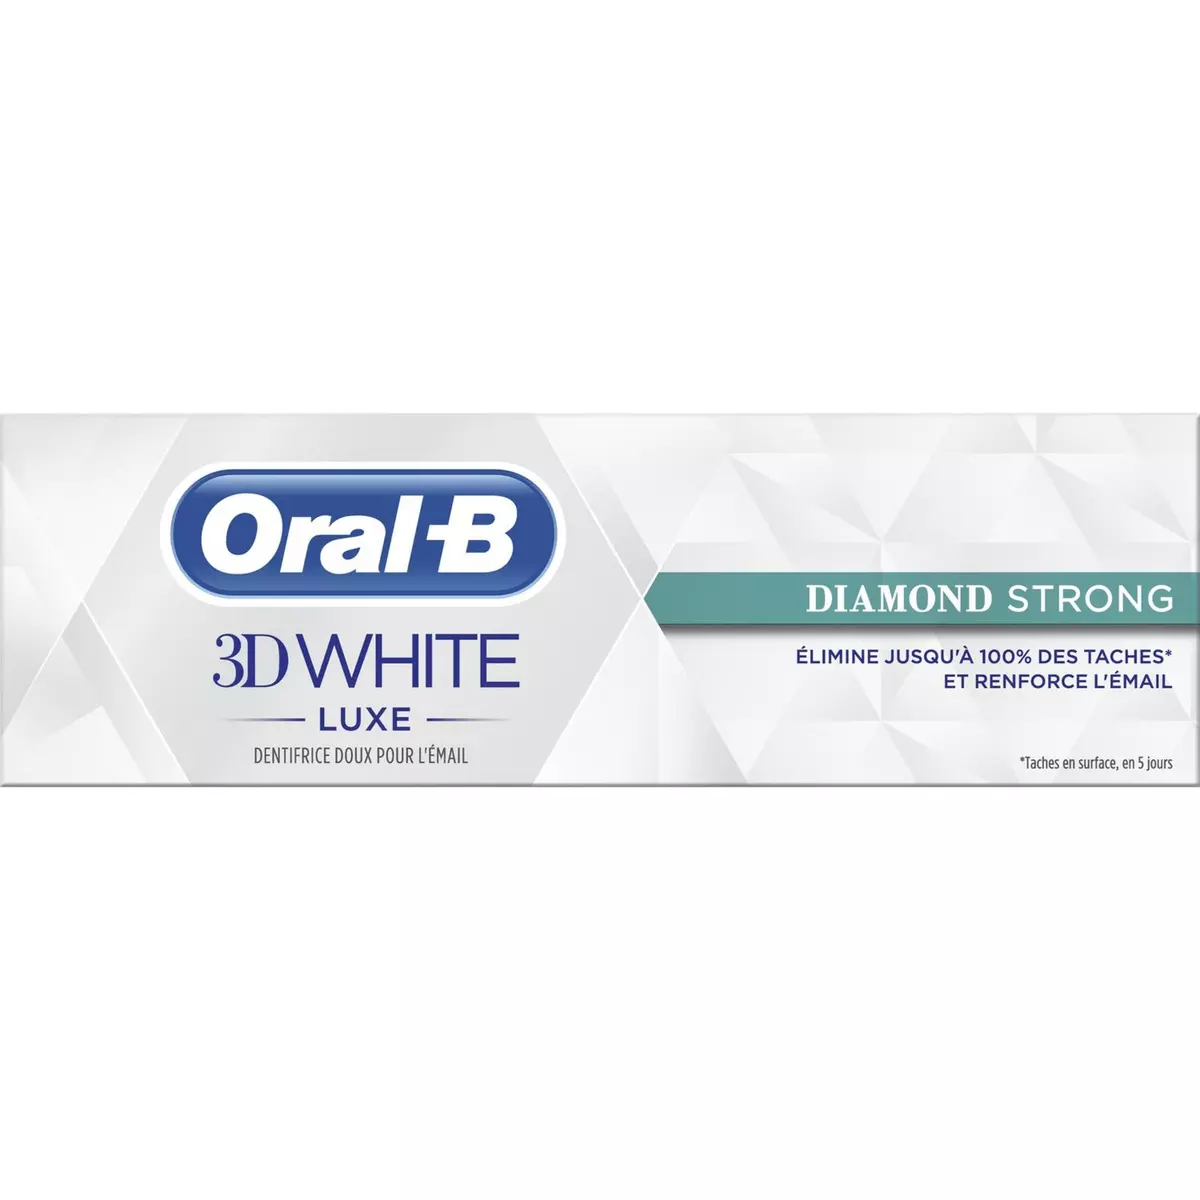 ORAL-B 3D White Luxe dentifrice doux pour l'email 75ml